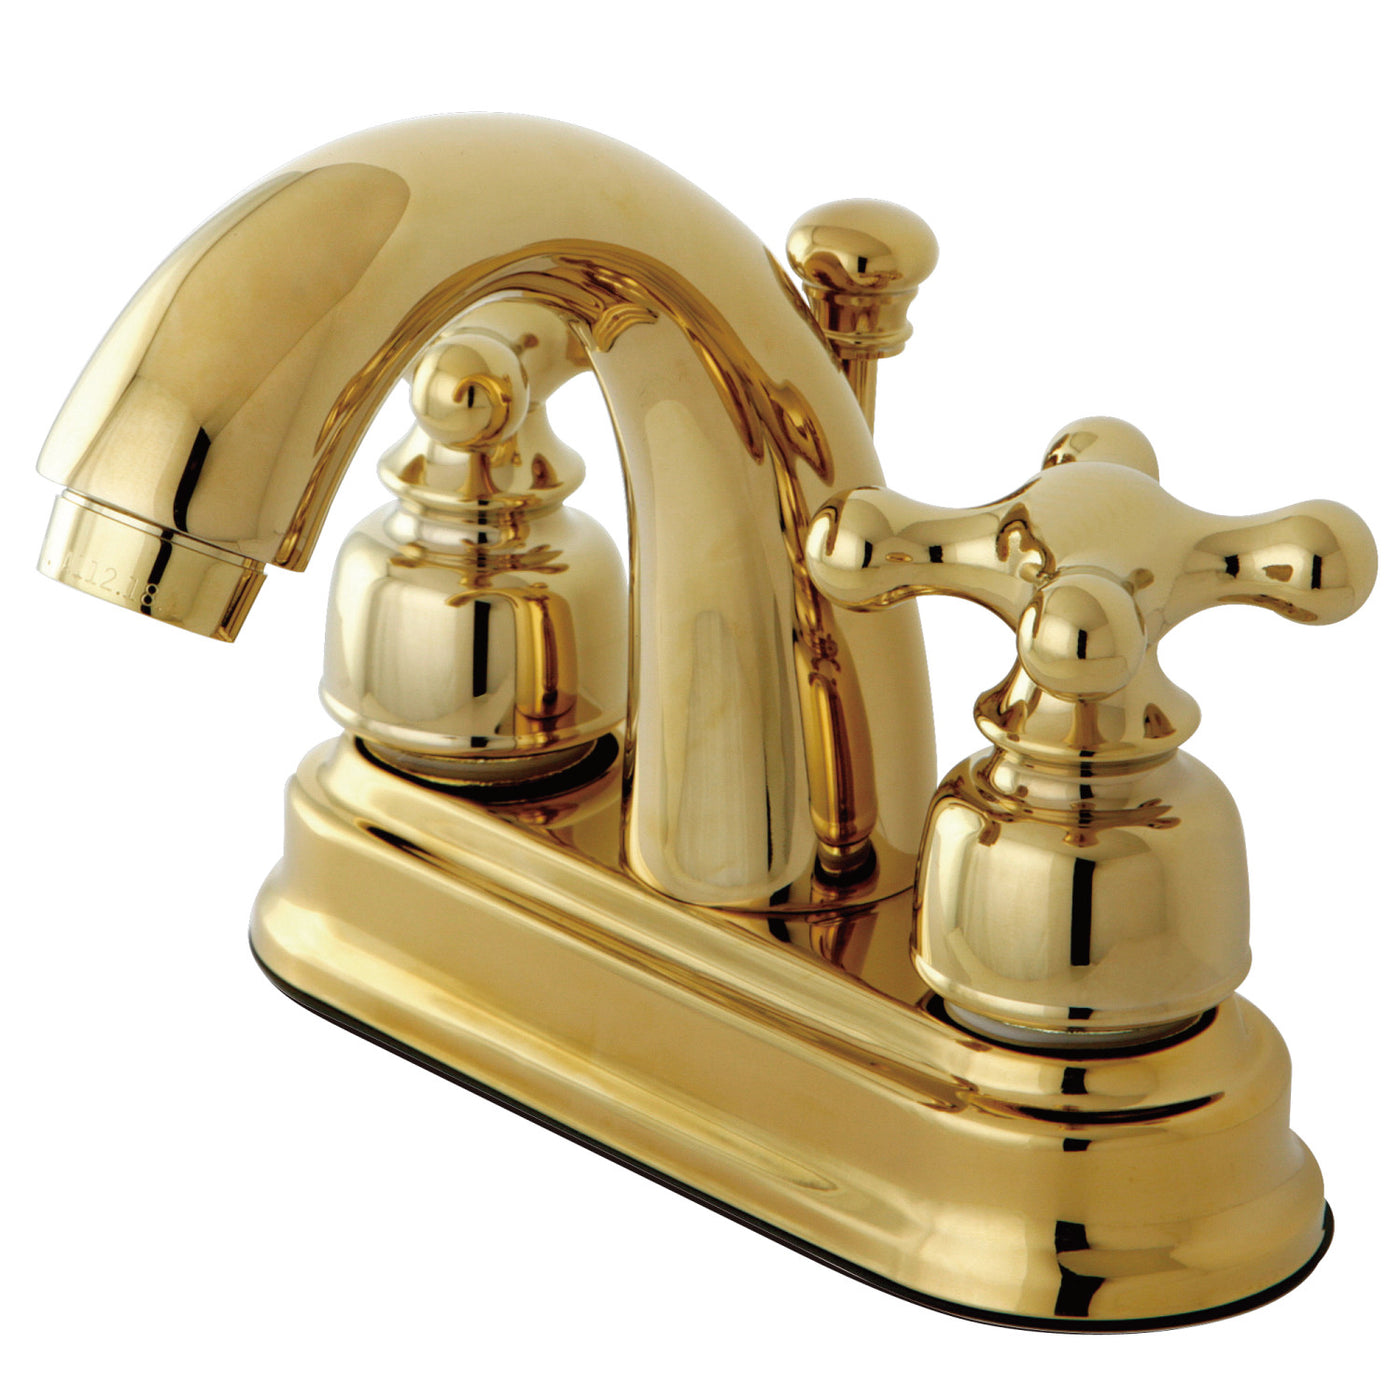 Elements of Design EB5612AX 4-Inch Centerset Bathroom Faucet, Polished Brass